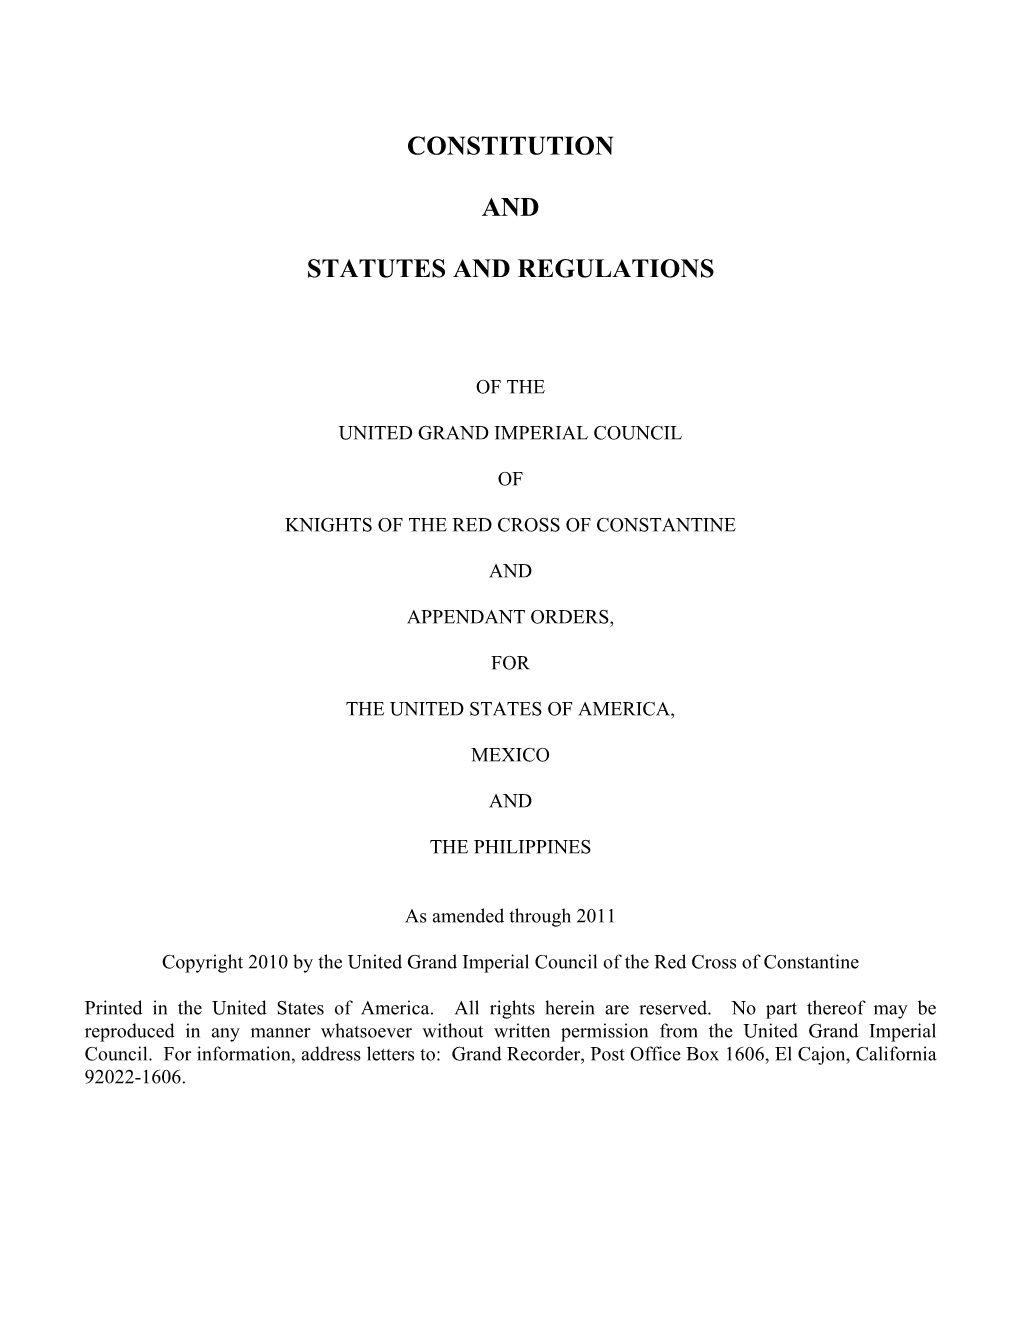 Constitution and Statutes and Regulations (Grand Recorder)